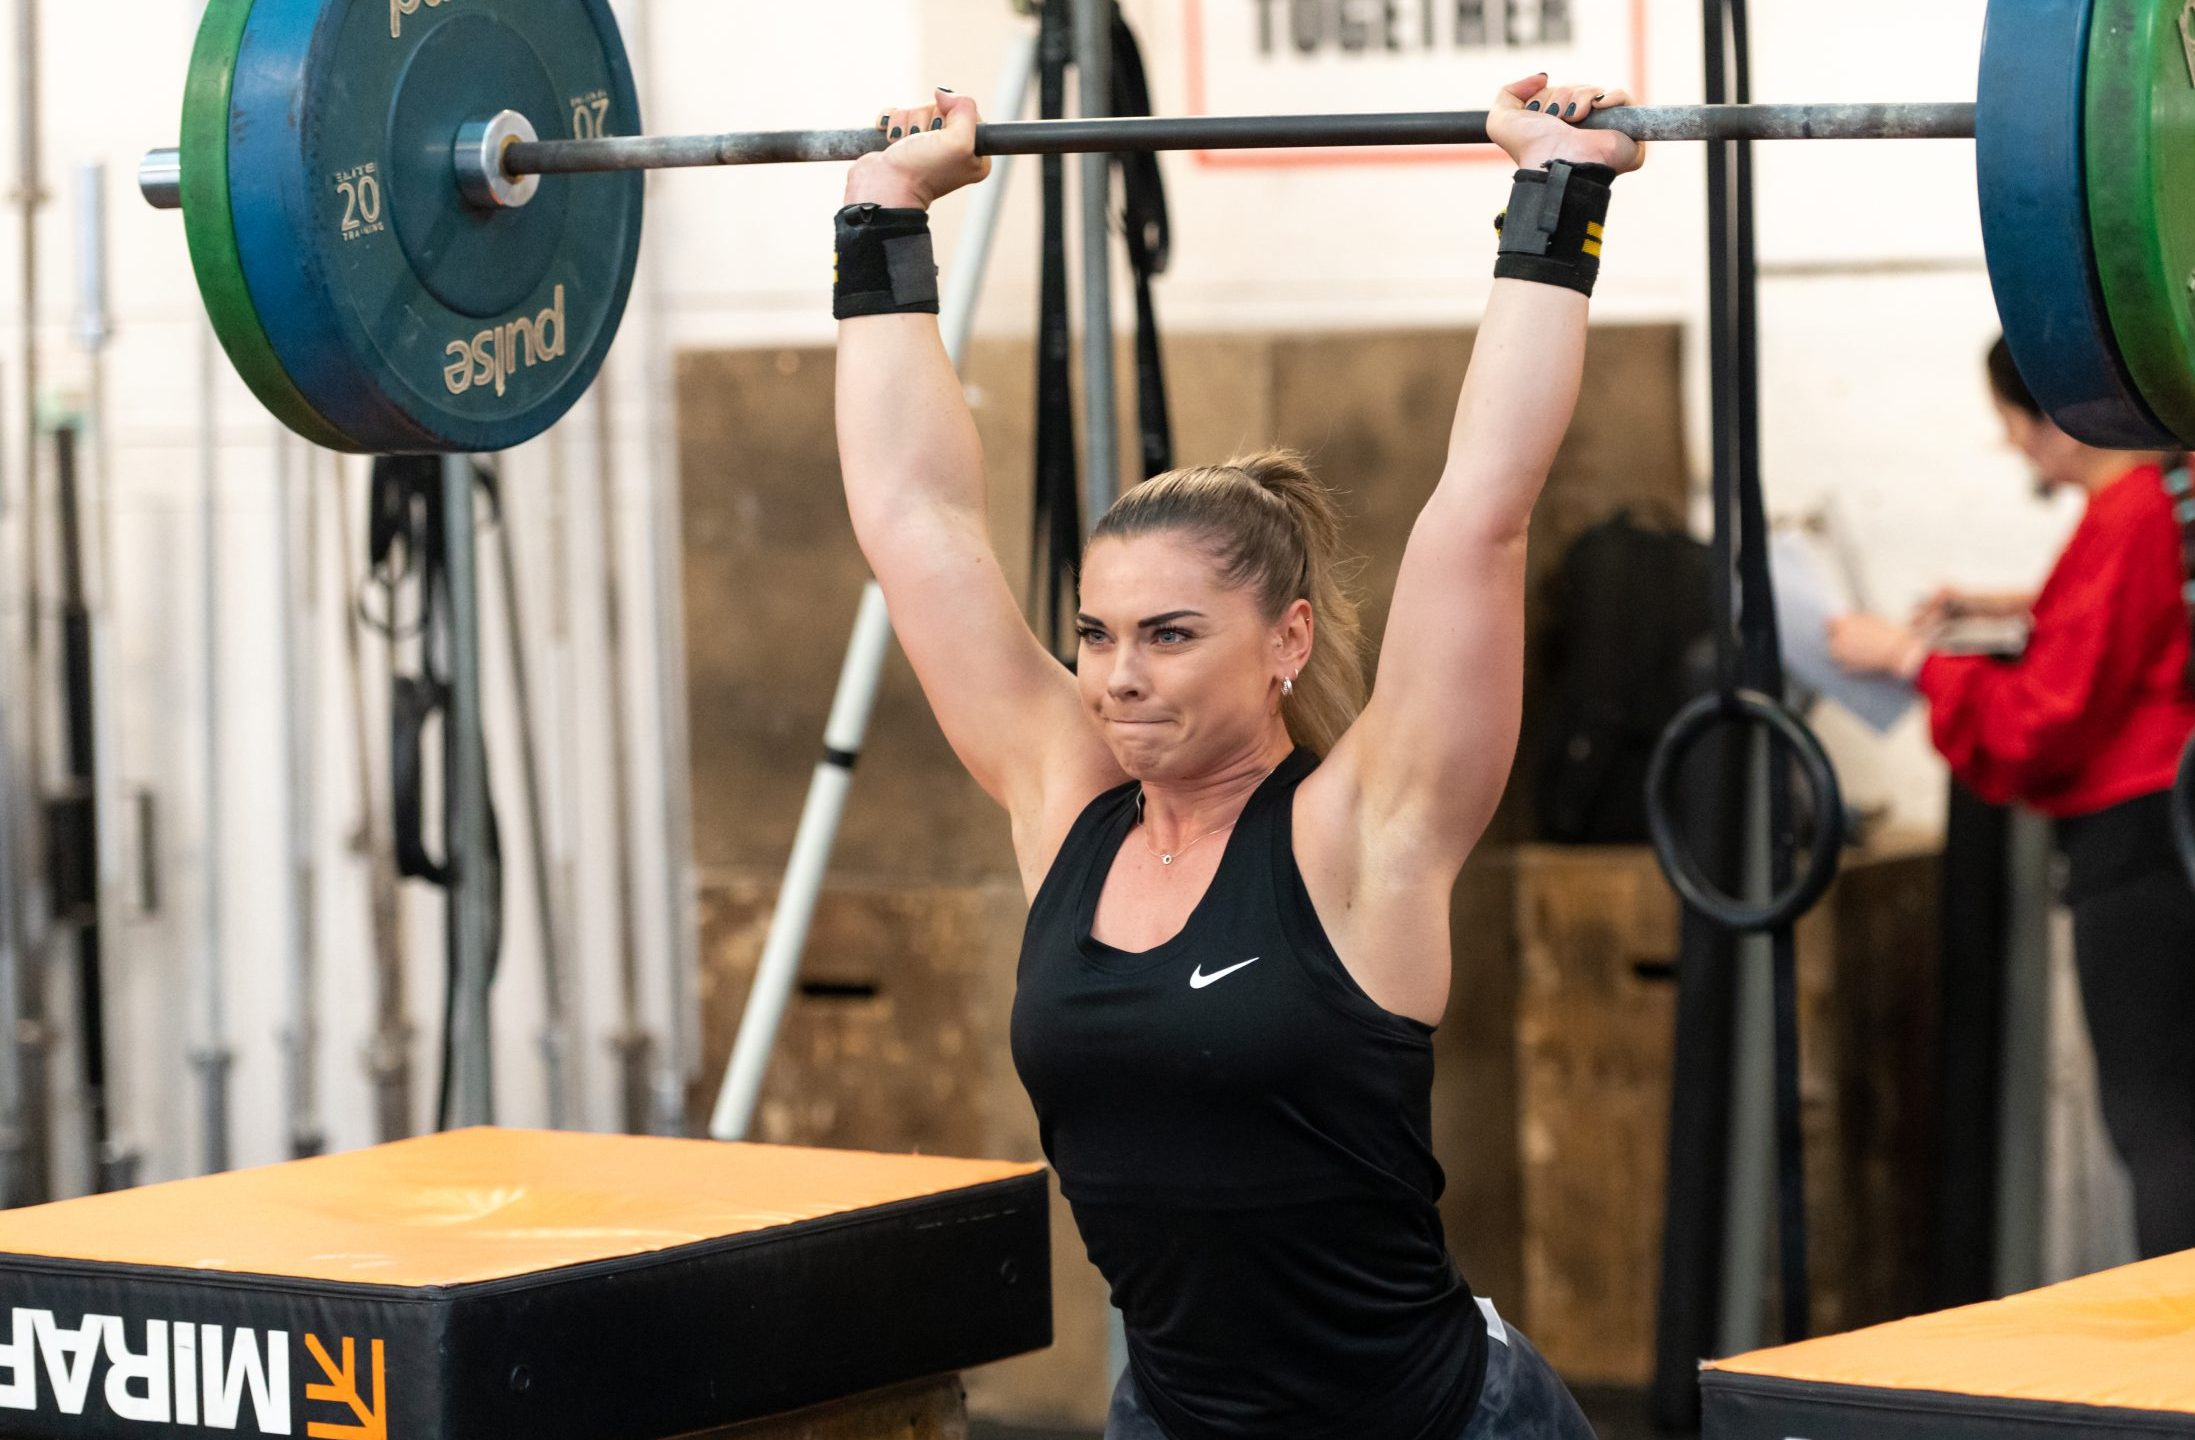 White woman aged 25-35 lifting a heavy weight